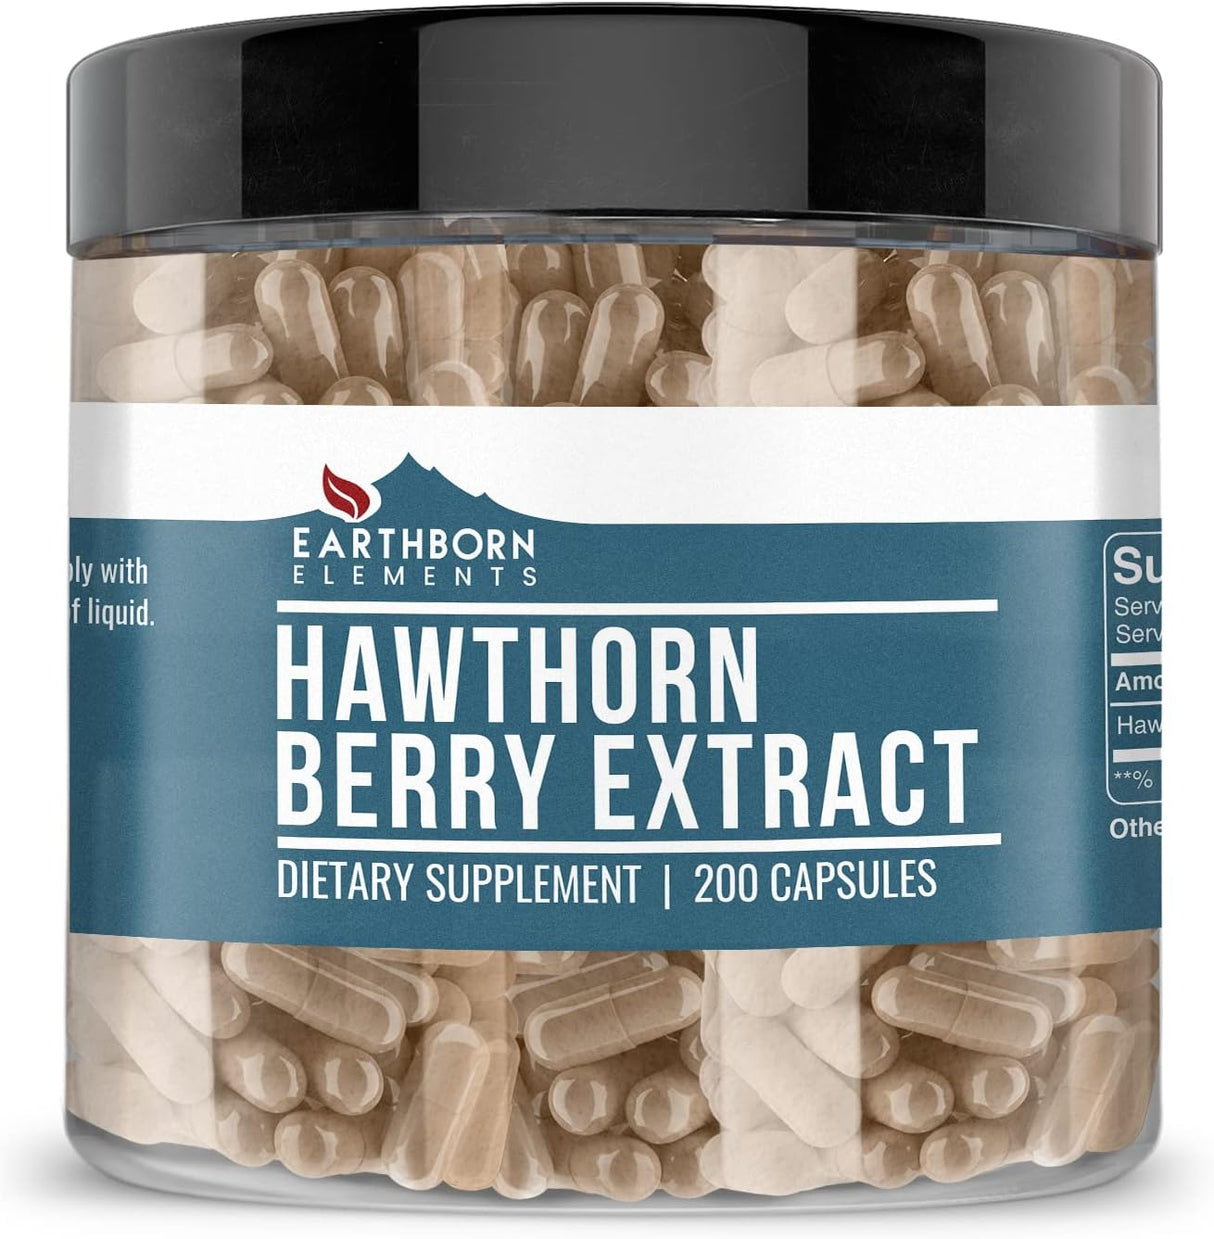 Earthborn Elements Hawthorn Berry Extract 200 Capsulas